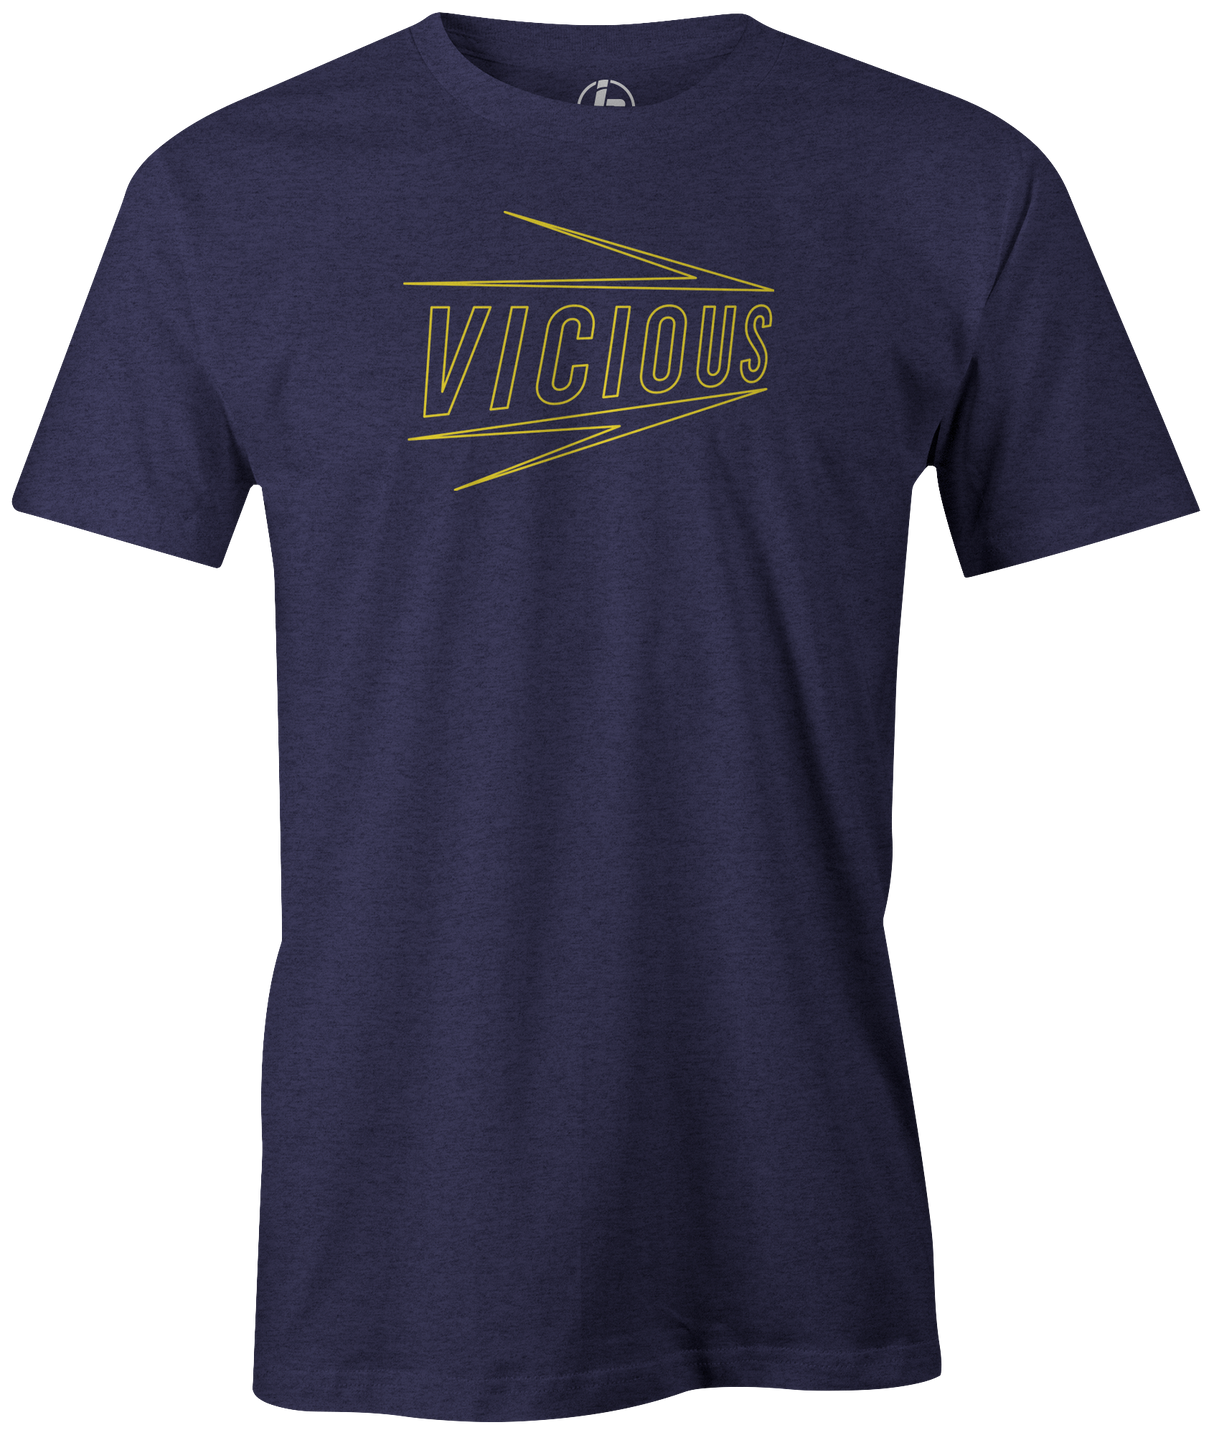 Did you love the Vicious? Re-live this iconic ball with this Hammer Vicious T-shirt! Hit the lanes with this cool retro t-shirt to show everyone how big of a bowling fan you are! Tshirt, tee, tee-shirt, tee shirt, teeshirt, shirt. League bowling team shirt. Old school. Men's. 